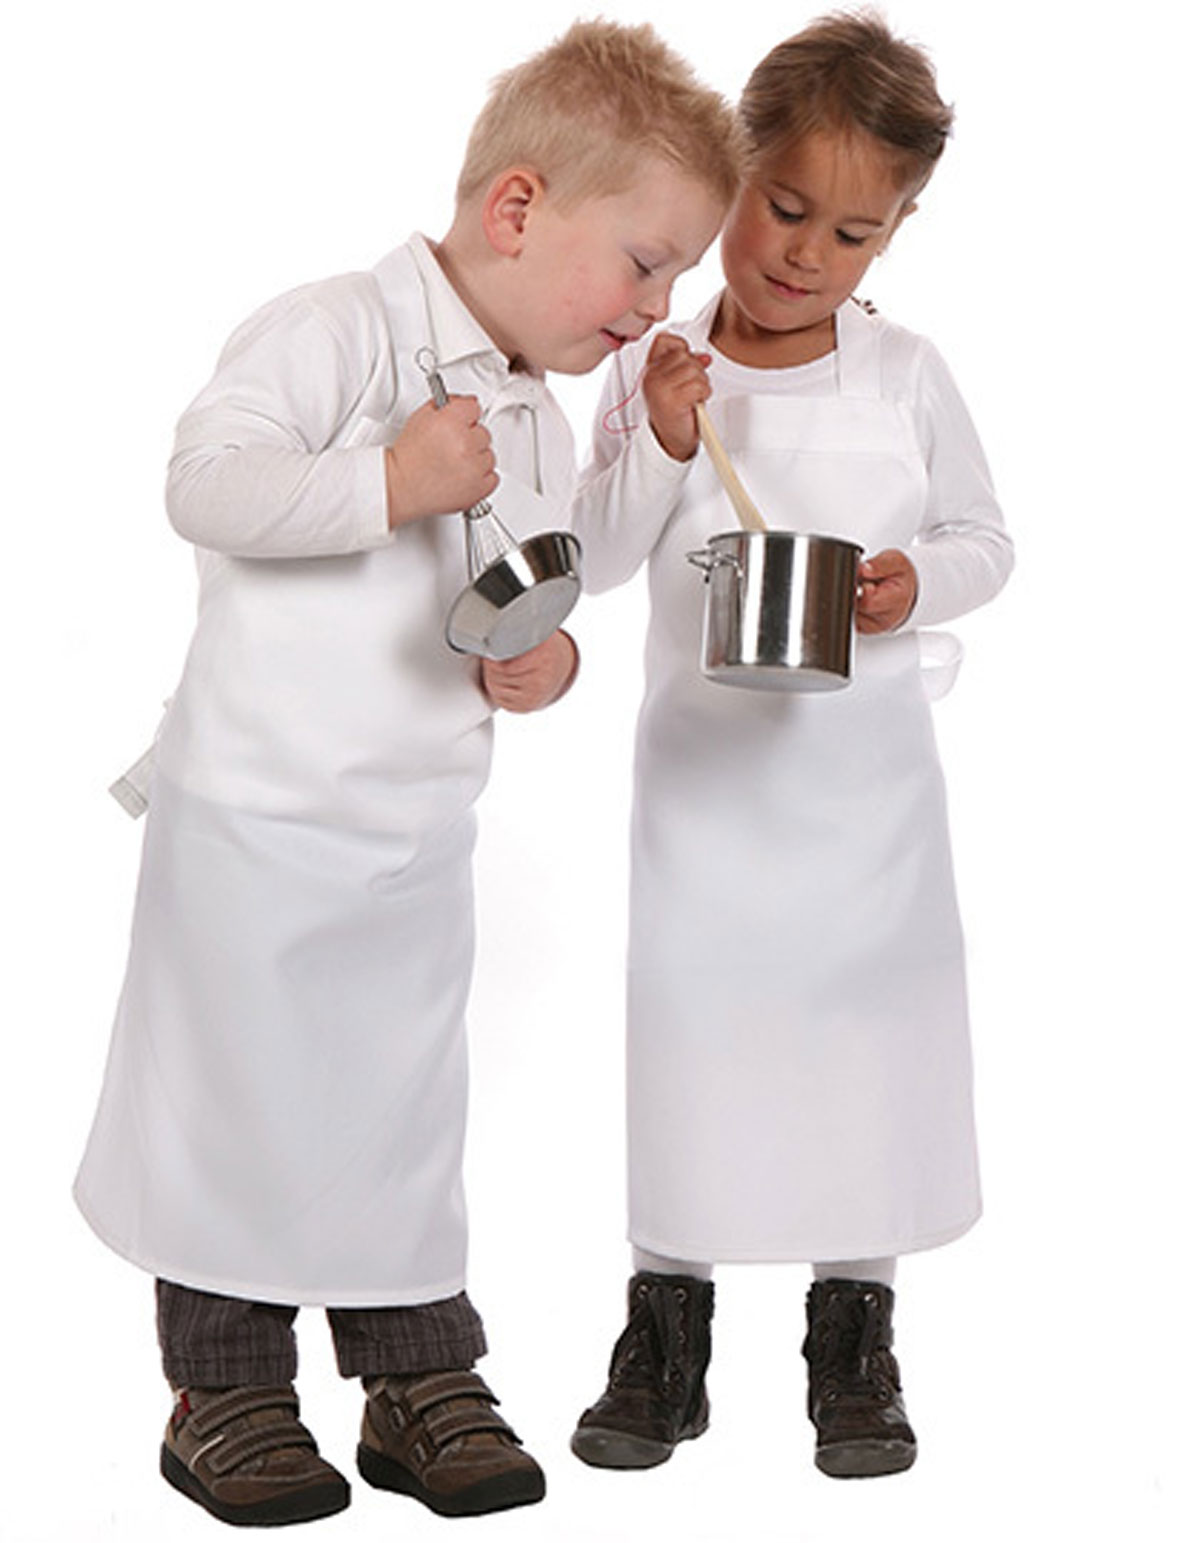 Kids´ Barbecue Apron Sublimation X977